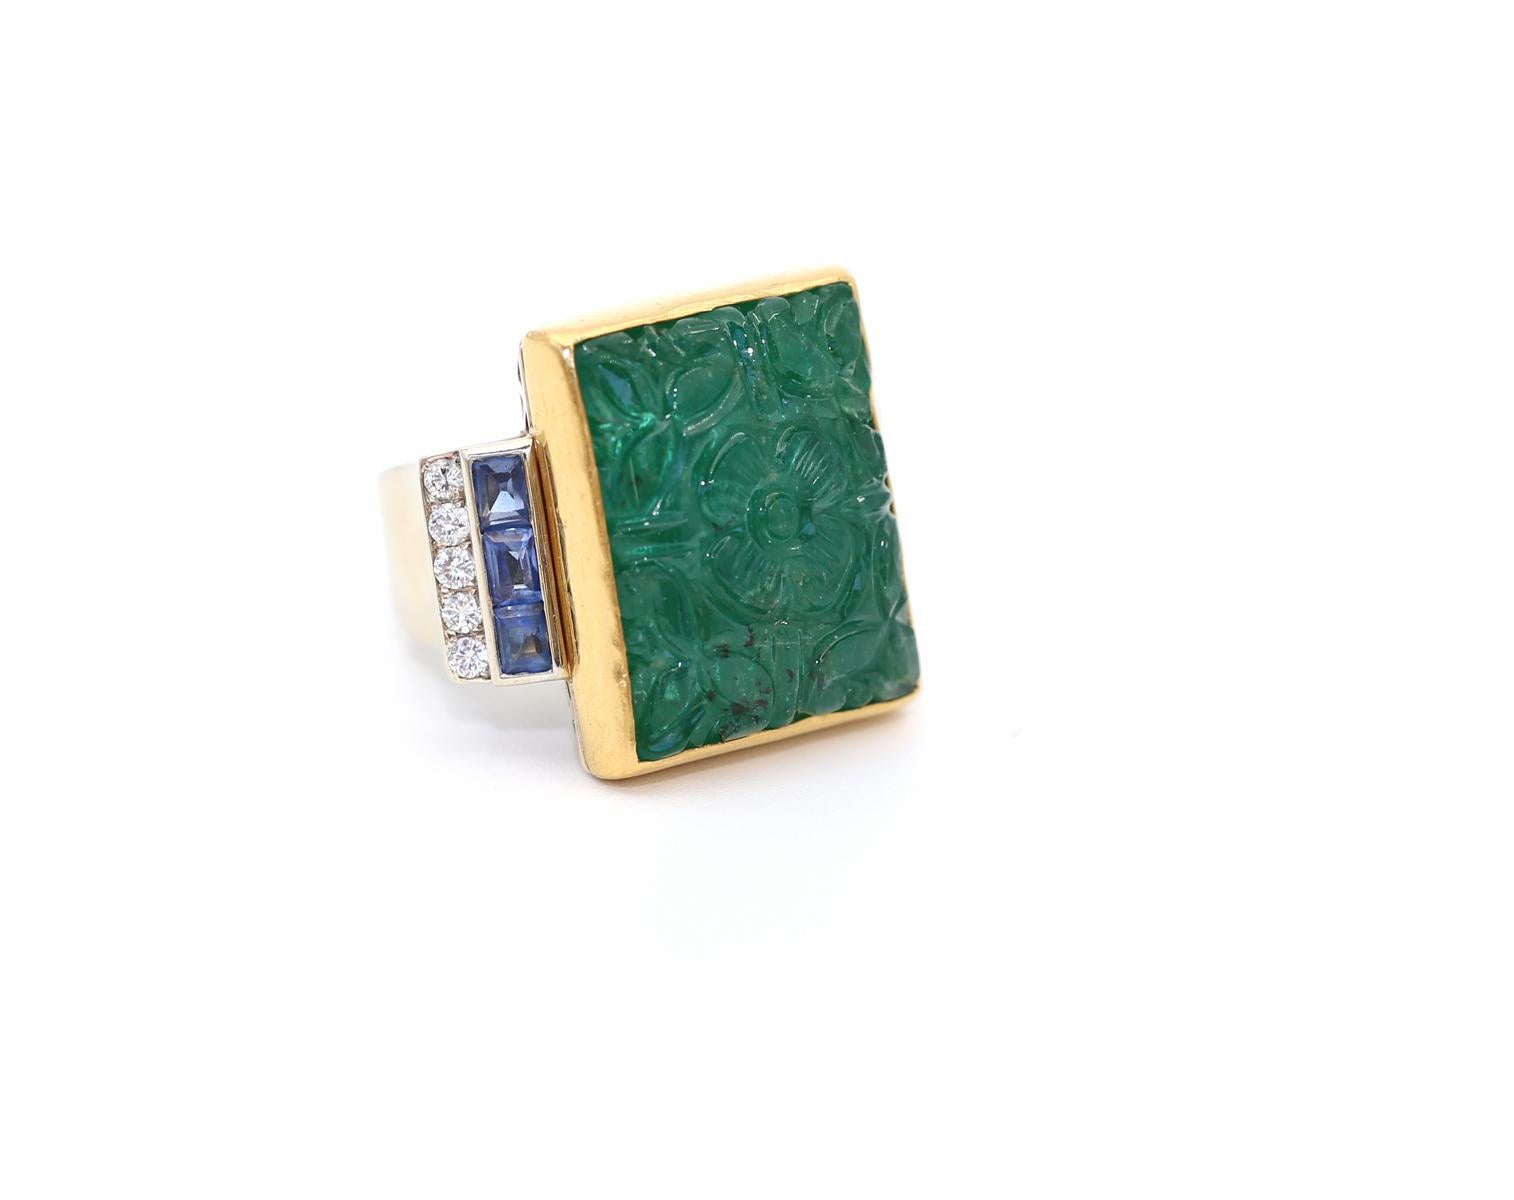 Carved Emerald Sapphires Diamonds Ring.
Massive and very rare precious Emerald artistically carved with floral ornamentation. Framed in 18K Yellow Gold. Underlined by two rows of Sapphires and fine Diamonds on each side. The sheer size of the ring